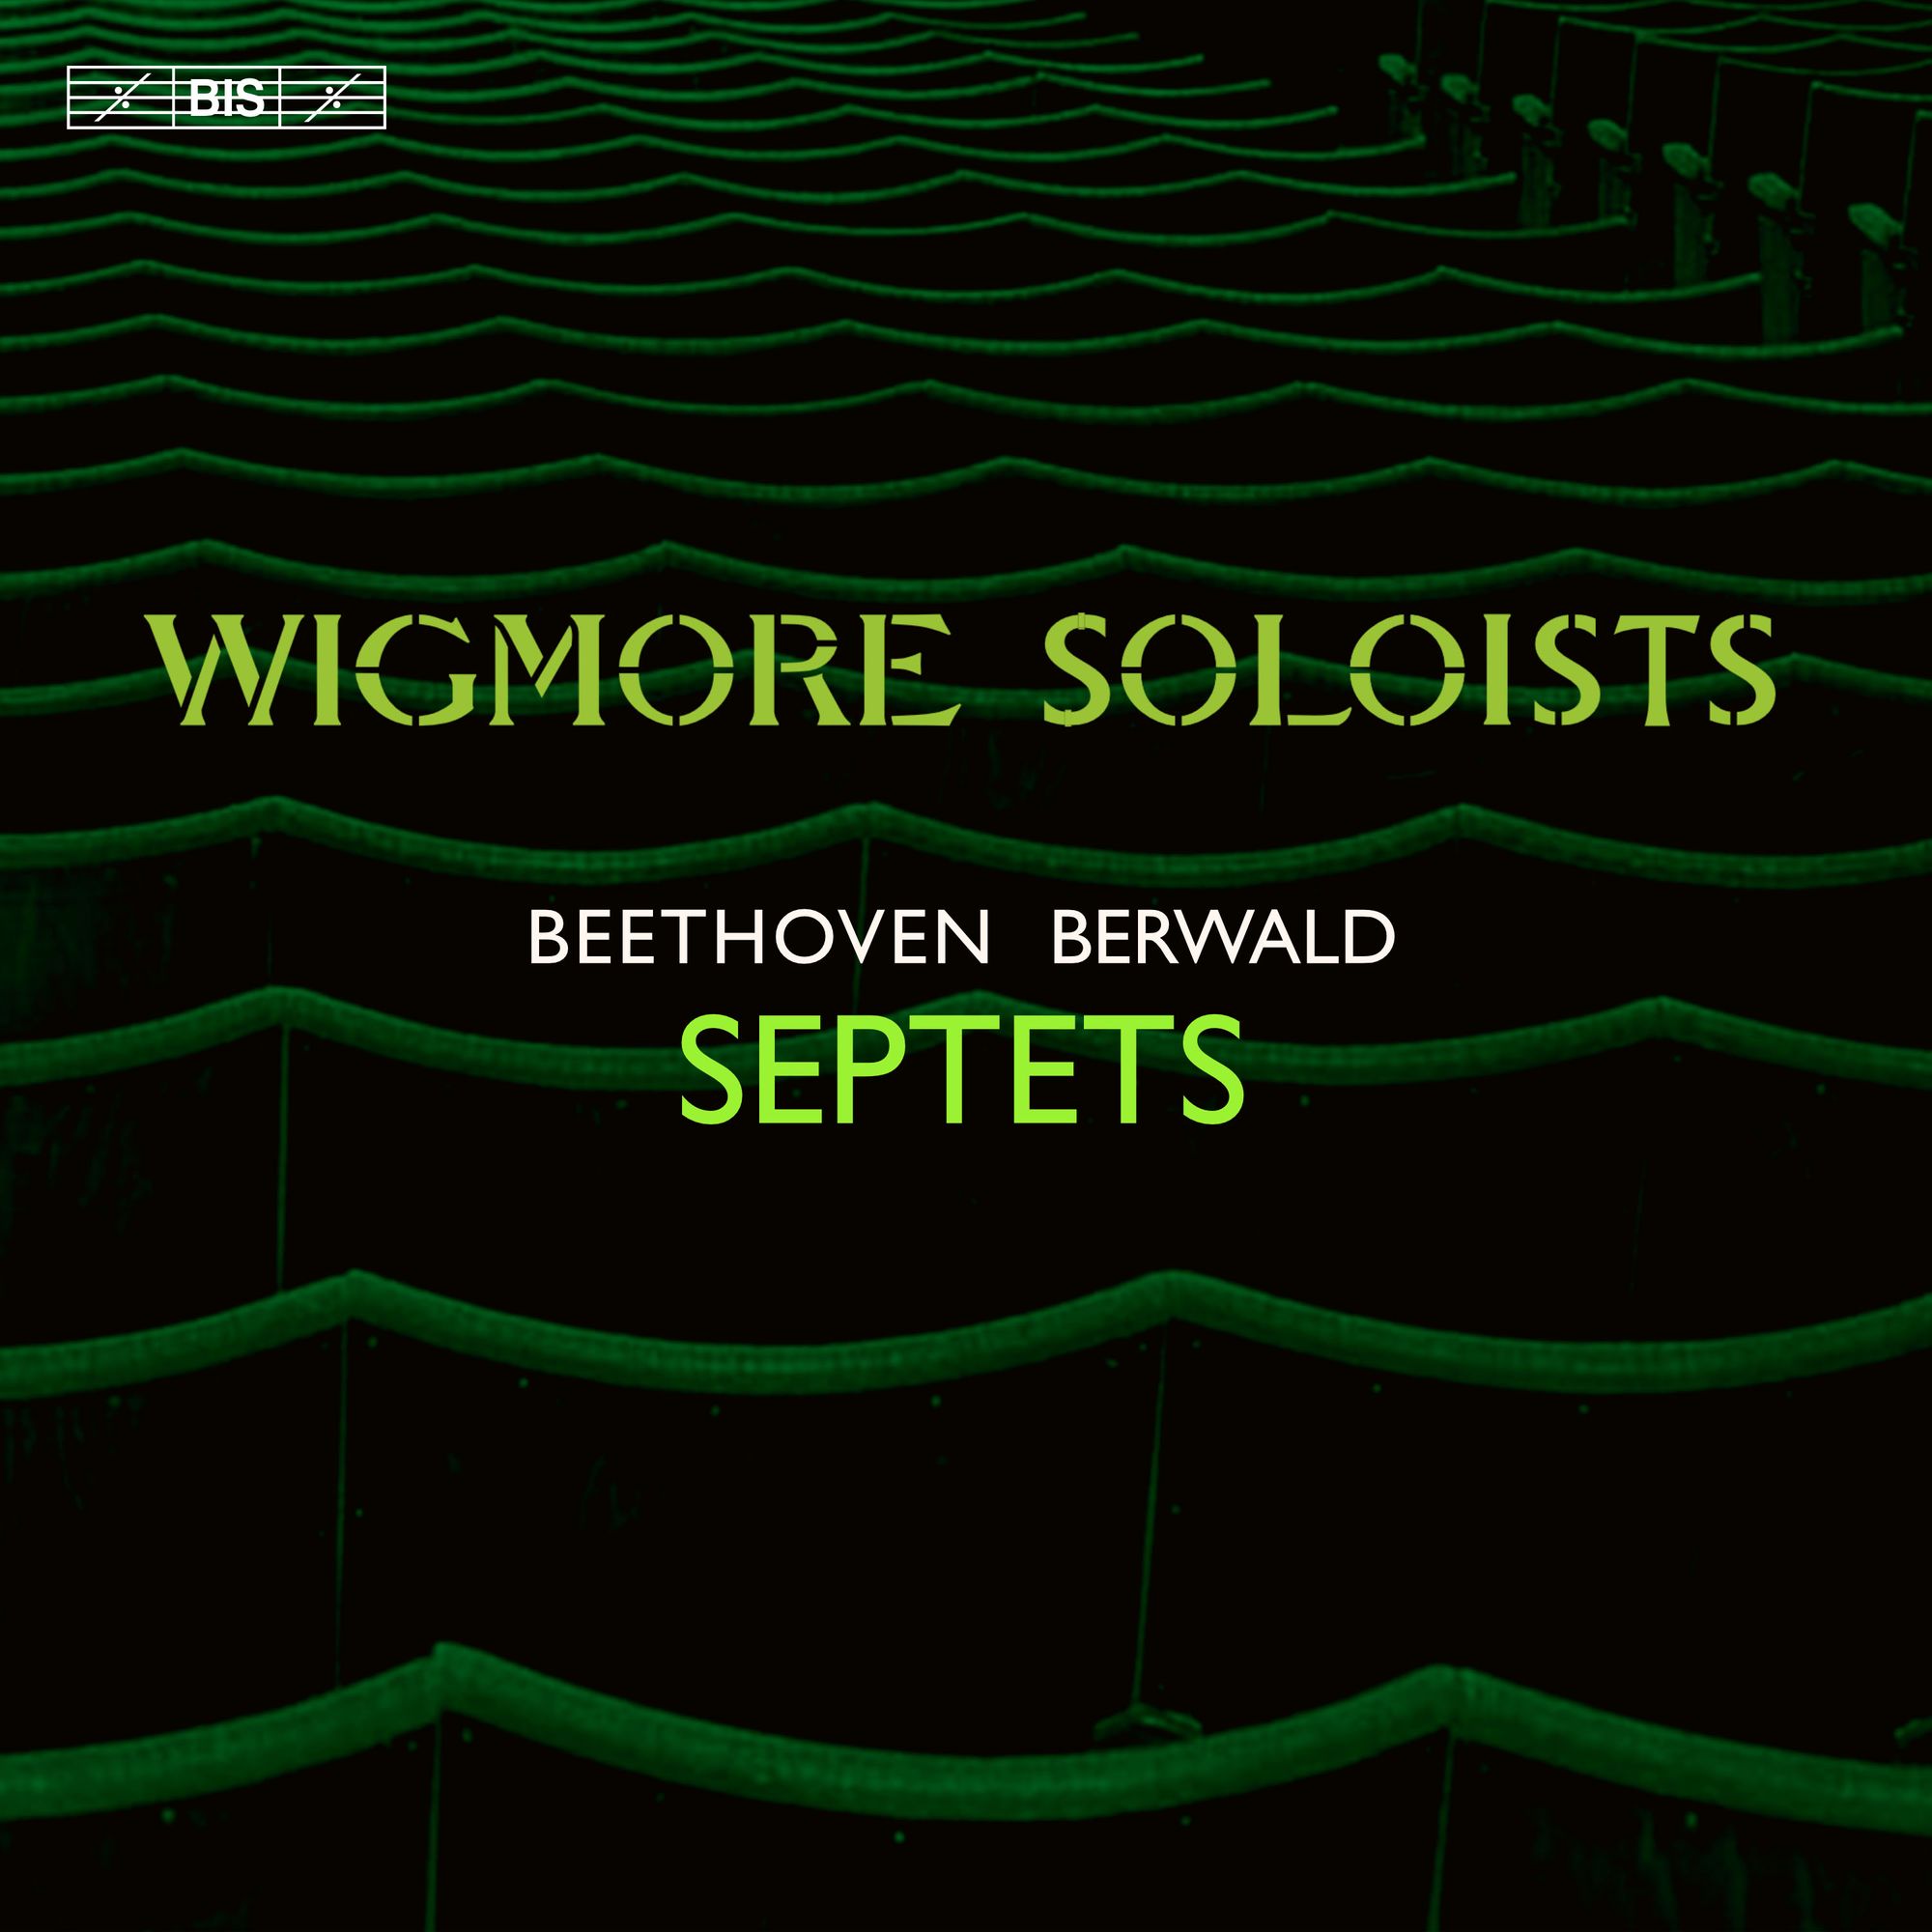 Beethoven and Berwald Septets from the Wigmore